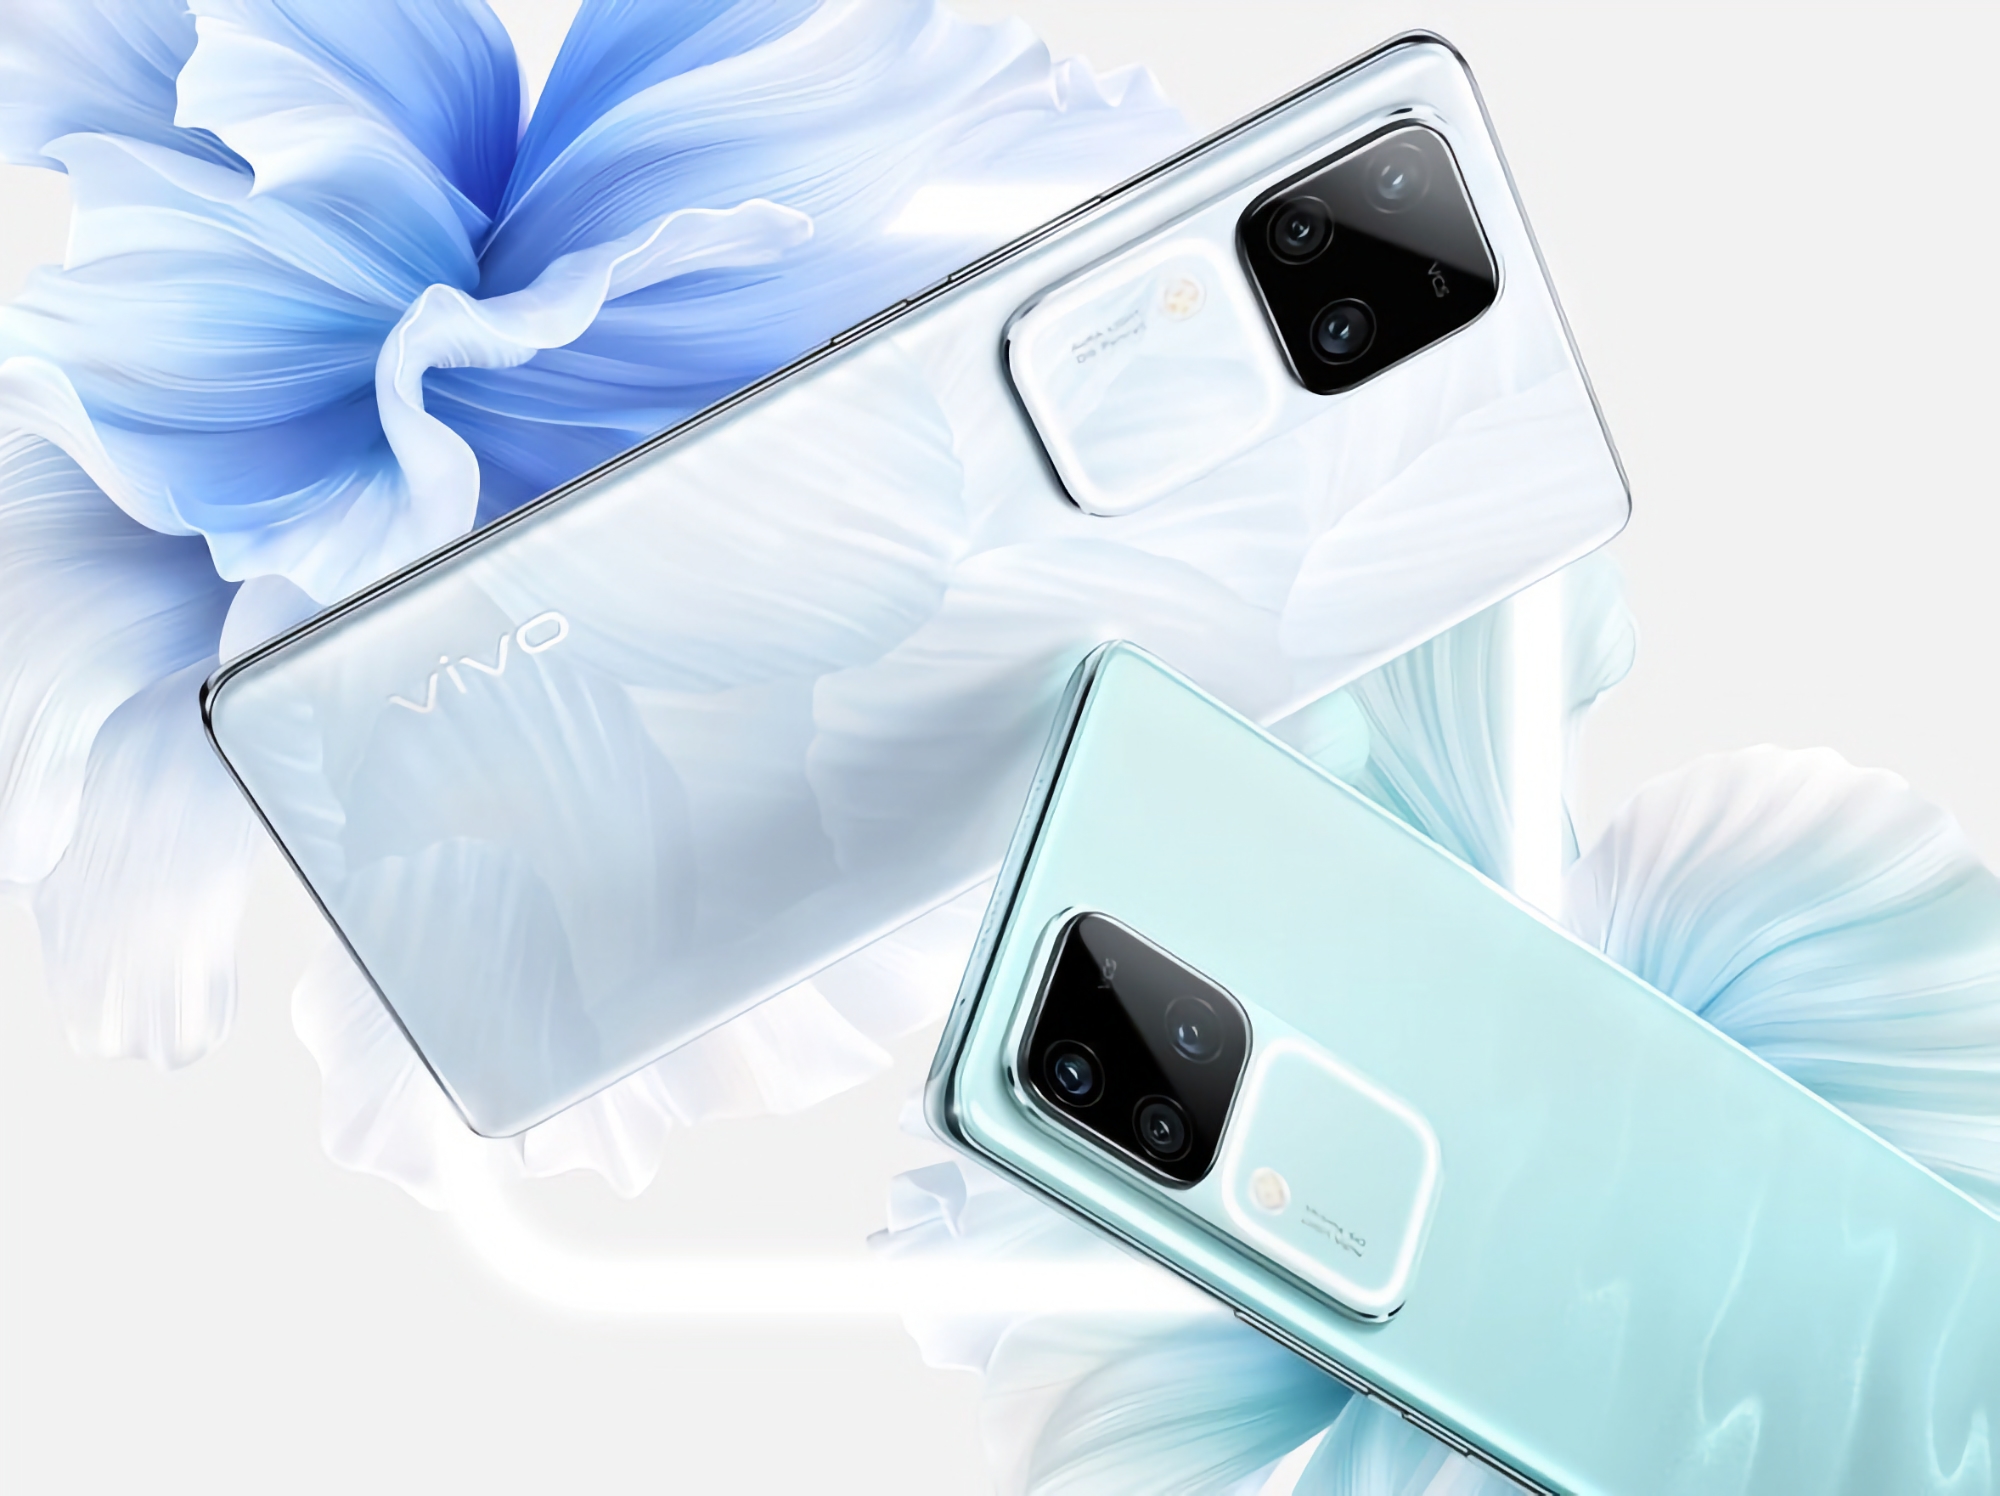 Without waiting for the announcement: vivo showed how the vivo S18 smartphone will look like